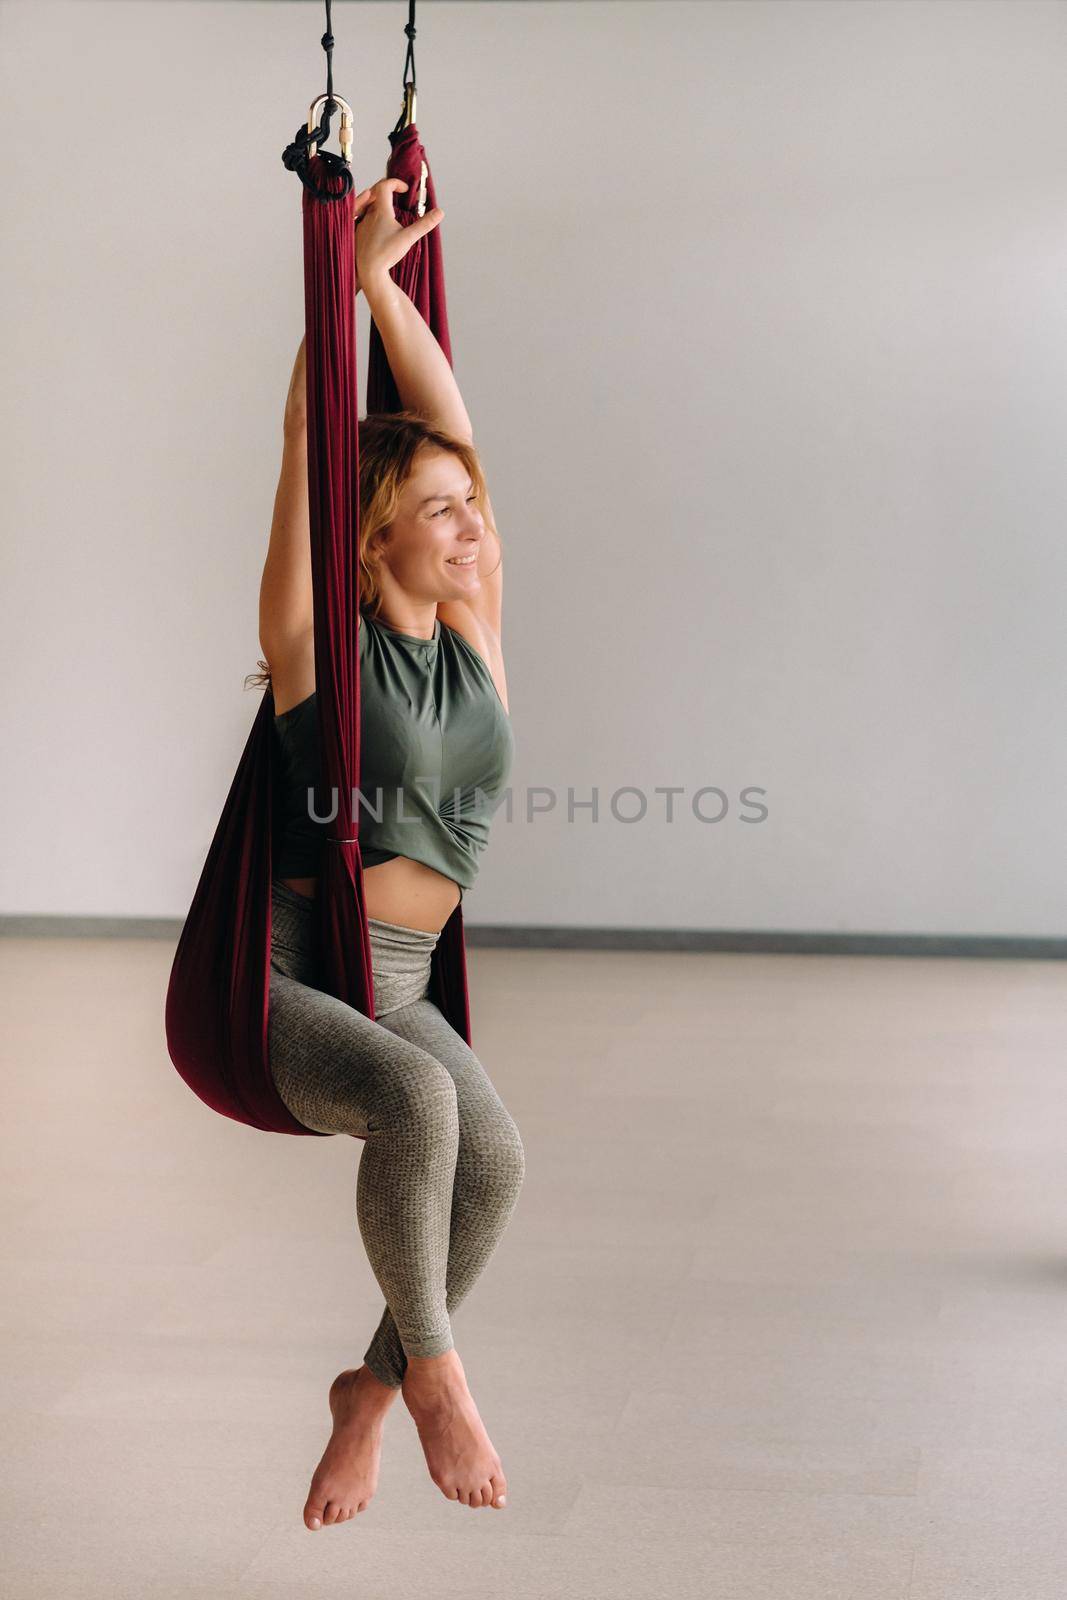 A woman does yoga sitting in a hanging hammock in the gym.